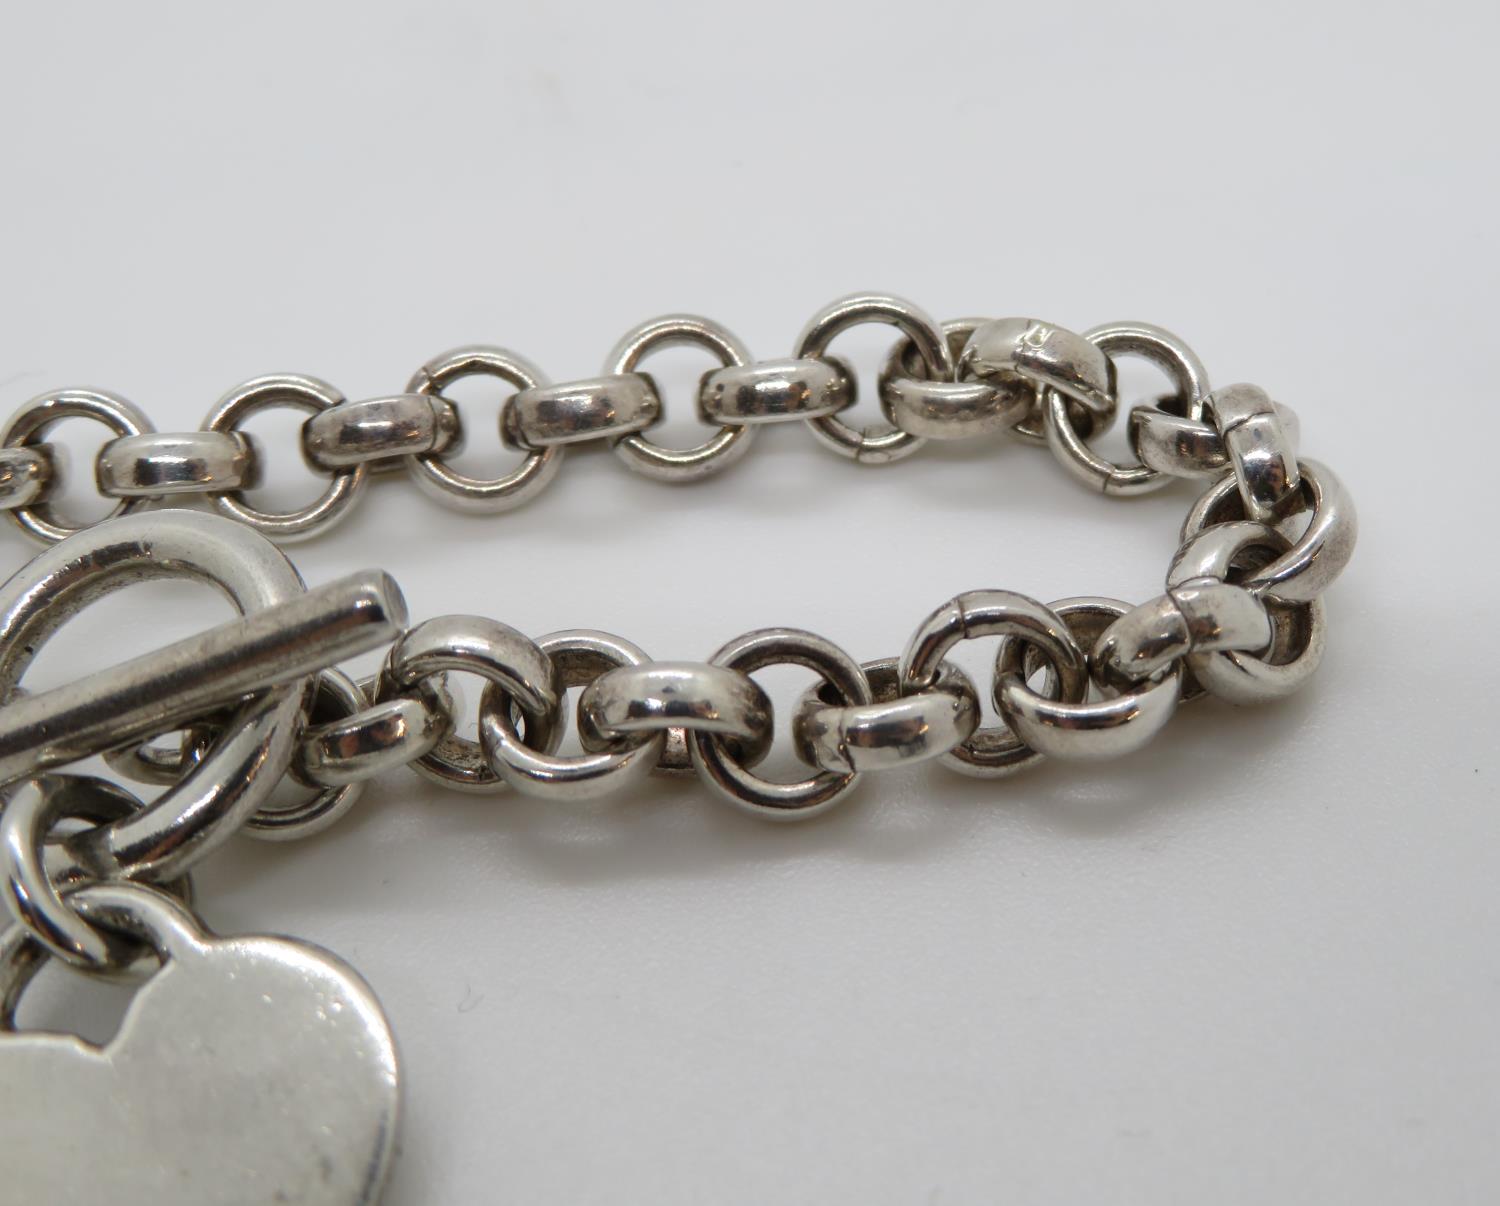 HM silver Tiffany style bracelet with heart 7.75" 31g - Image 2 of 2